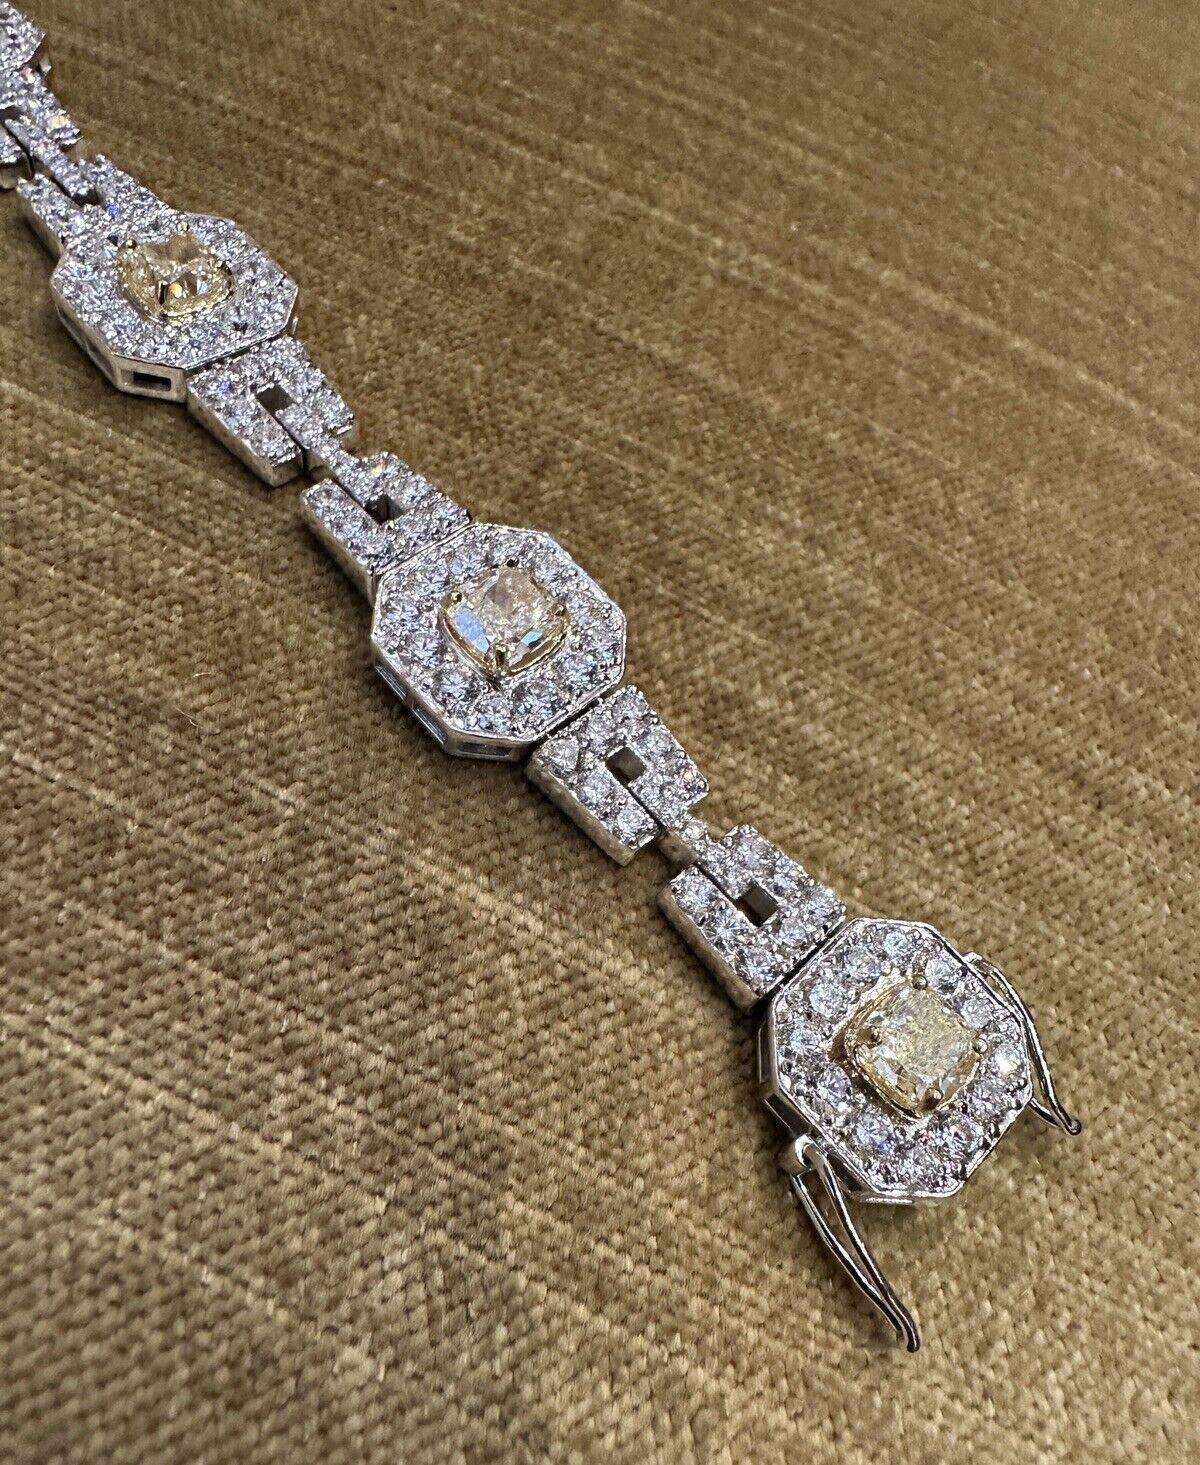 Natural Yellow and White Diamond Bracelet in 18k White Gold 

Diamond Link Bracelet features 6 Natural Cushion-cut Yellow Diamonds set in the center of each link, surrounded by White Round Brilliant Diamonds, and with Round Brilliant Diamonds on the